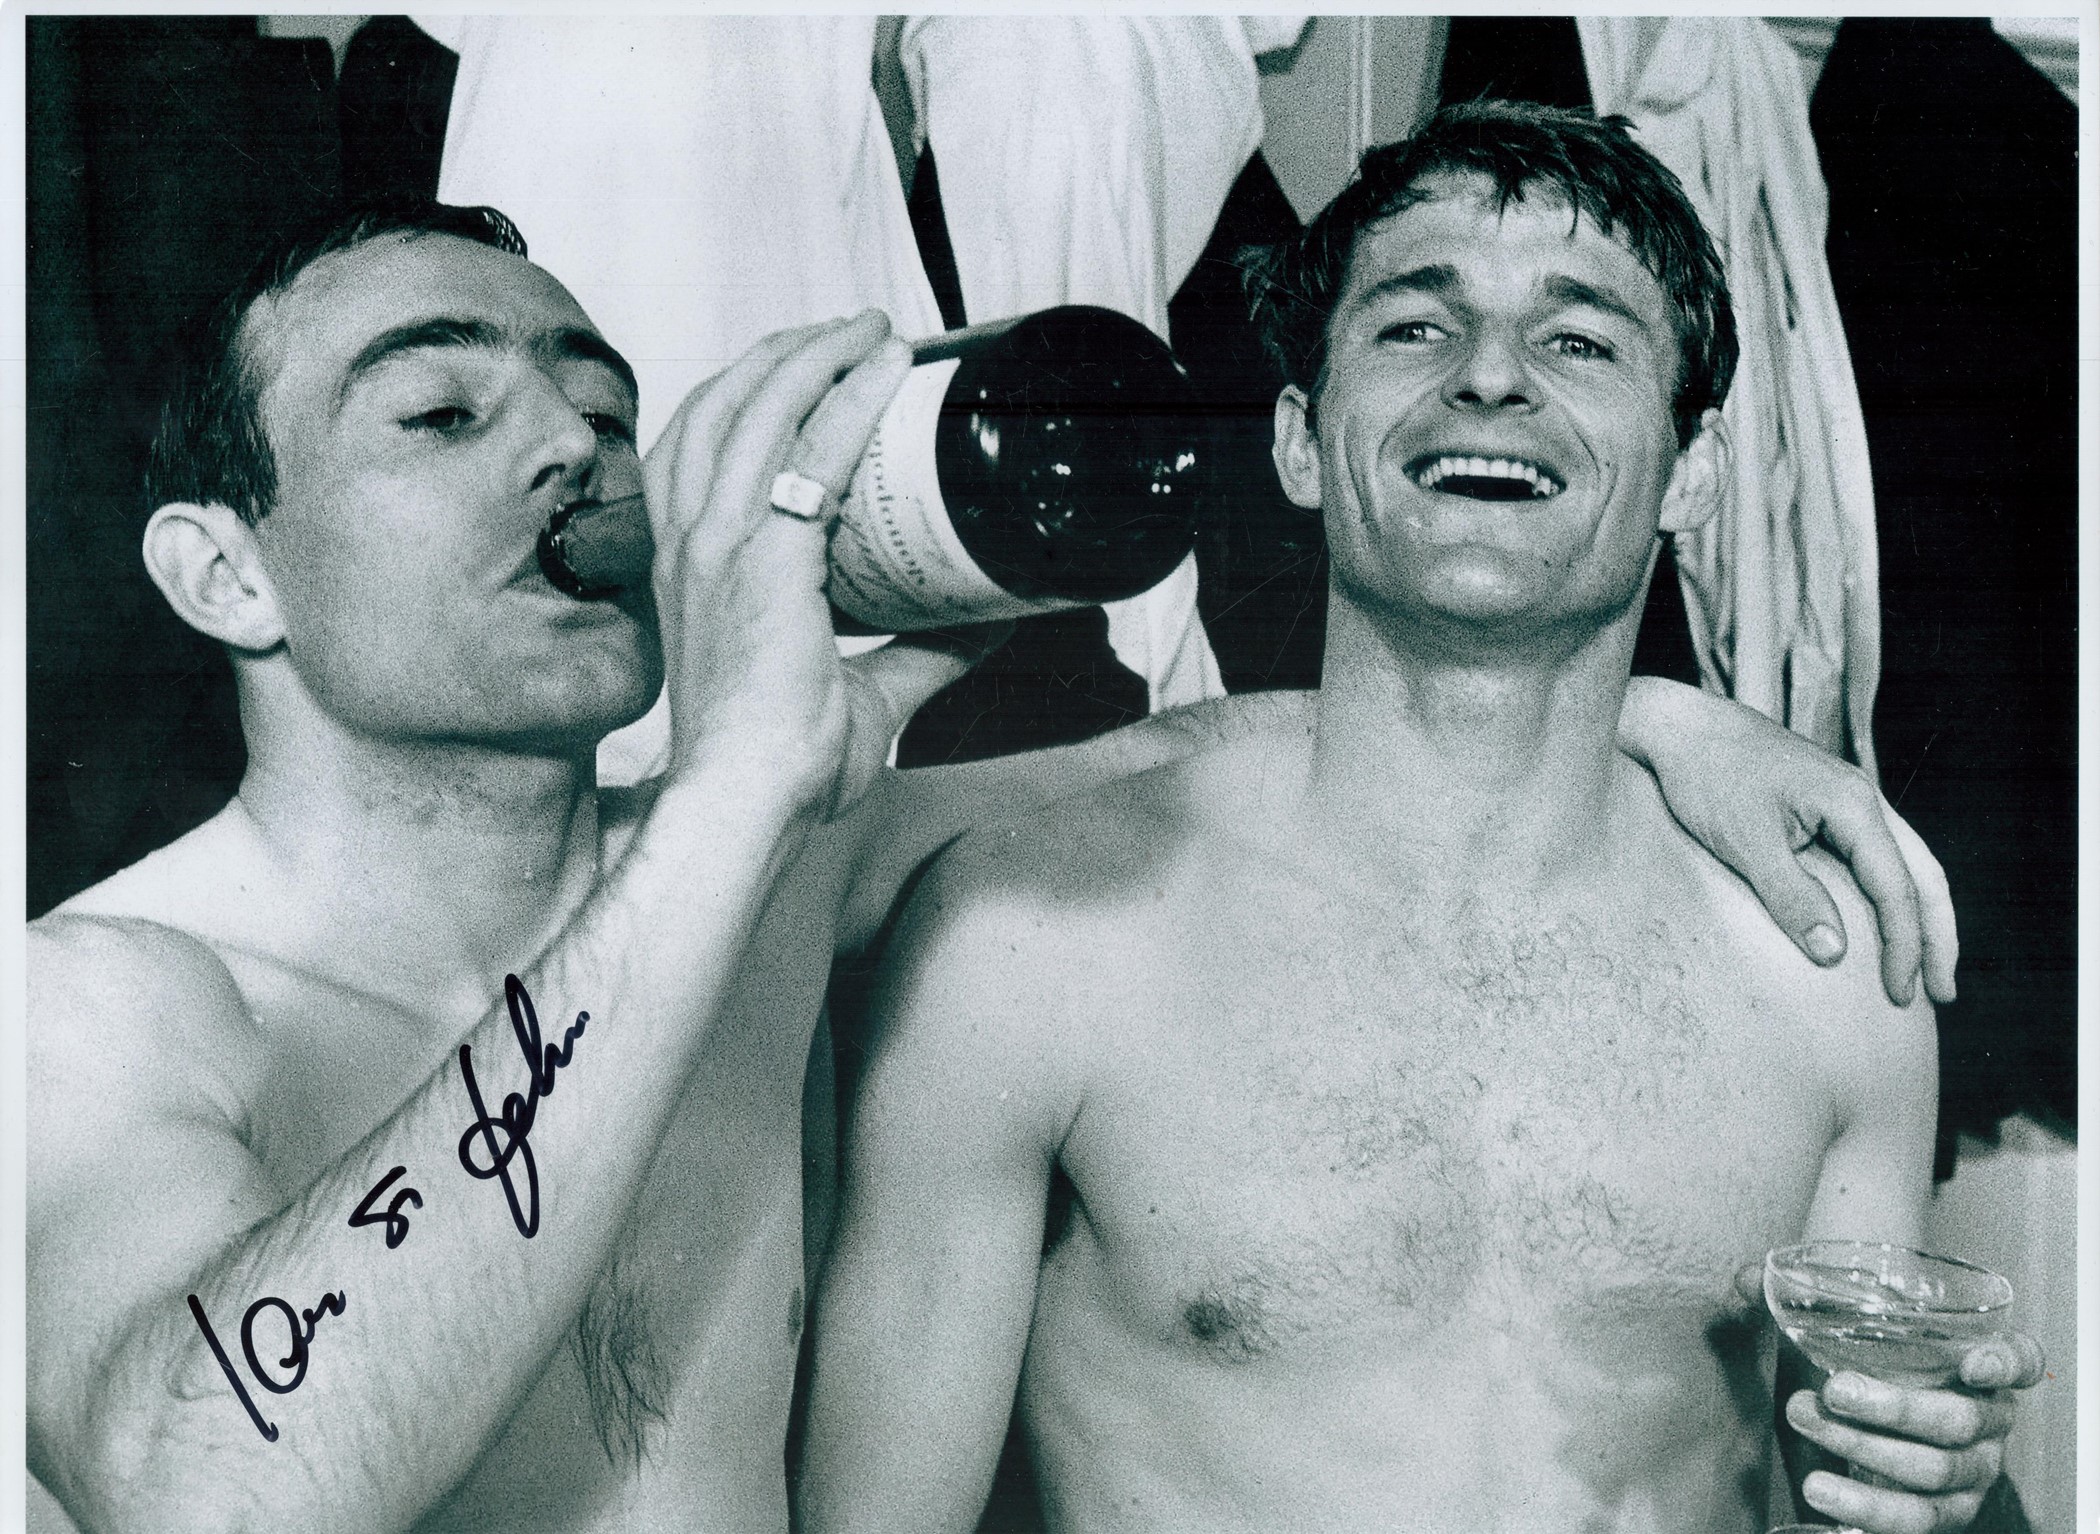 Ian St John Signed 16 x 12 inch Black and White Glossy Photo Pictured Drinking Champagne. Signed